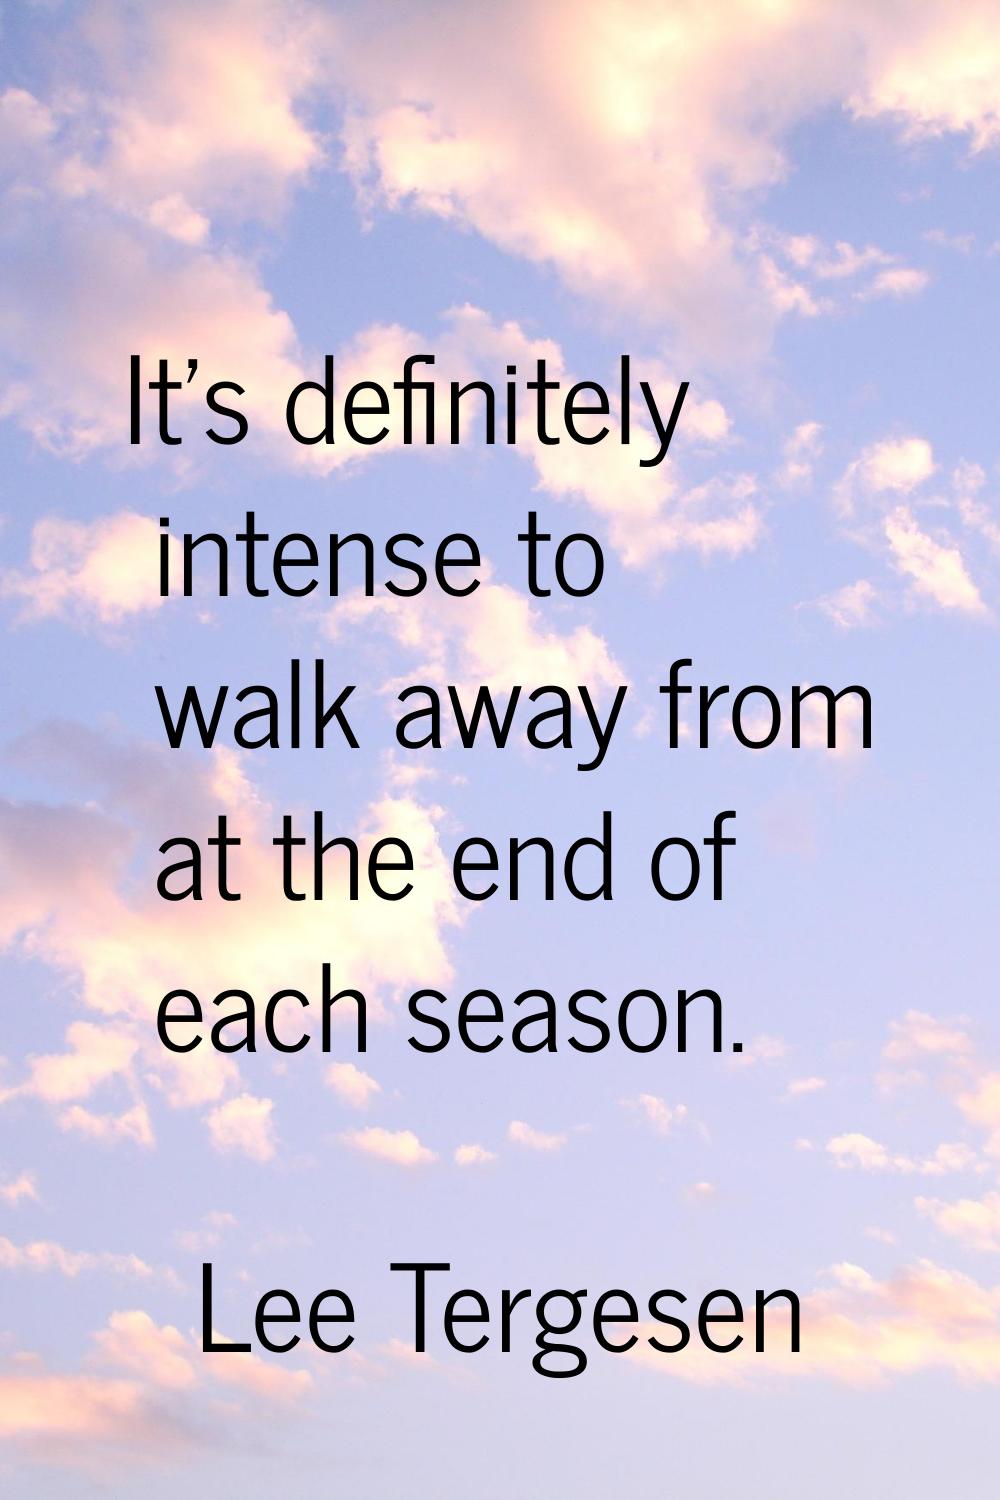 It's definitely intense to walk away from at the end of each season.